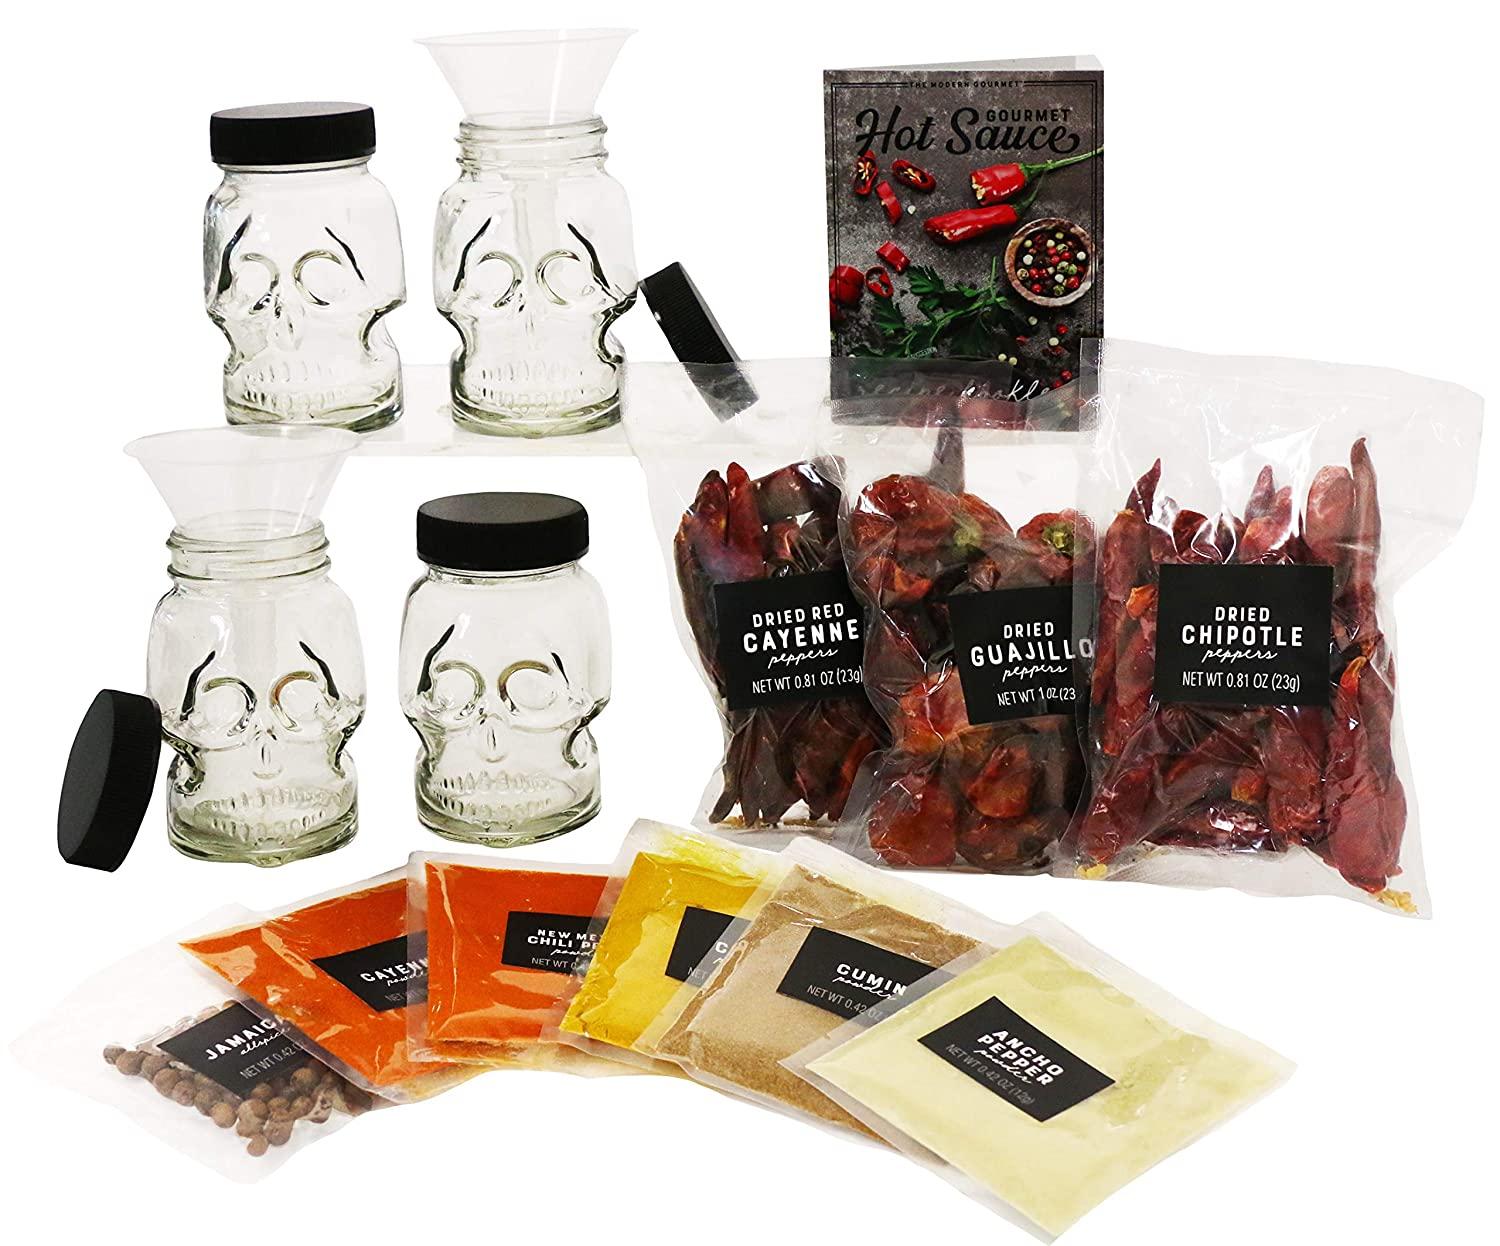 Personalized Hot Sauce Making Kit, Spicy Gifts For Guys